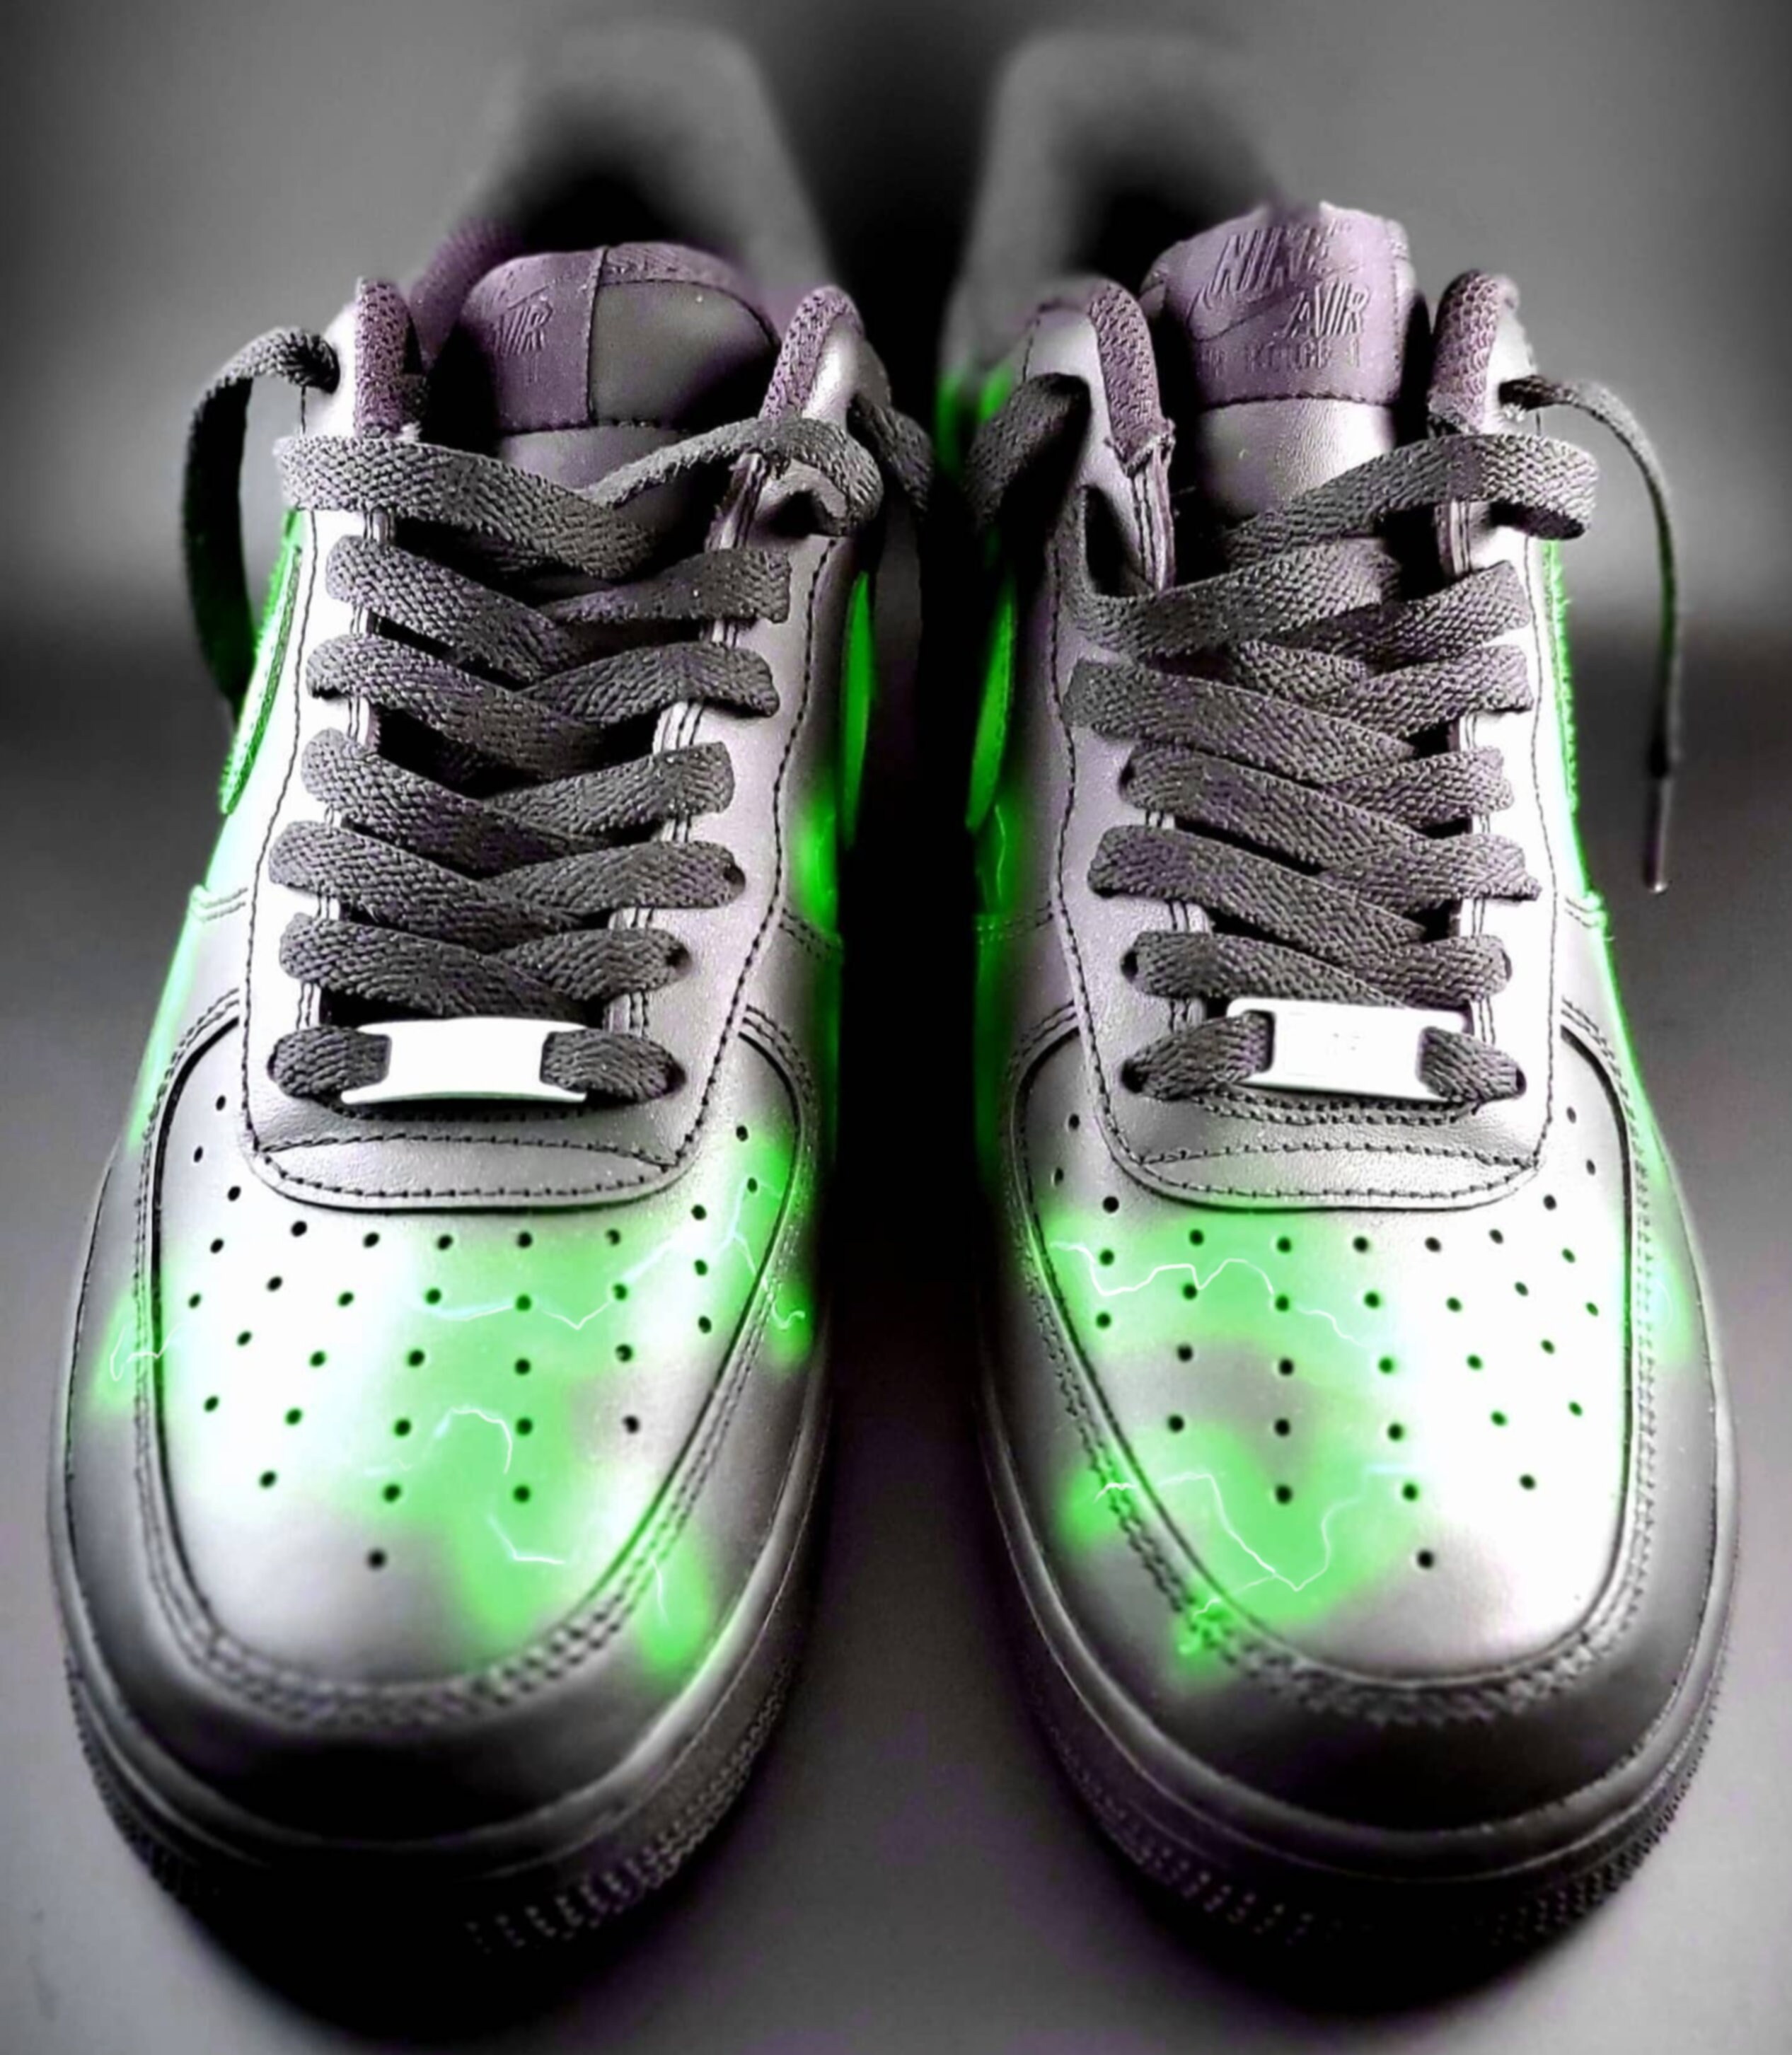 Glow Worms Glow in the Dark Nike AF1 shoes – chadcantcolor